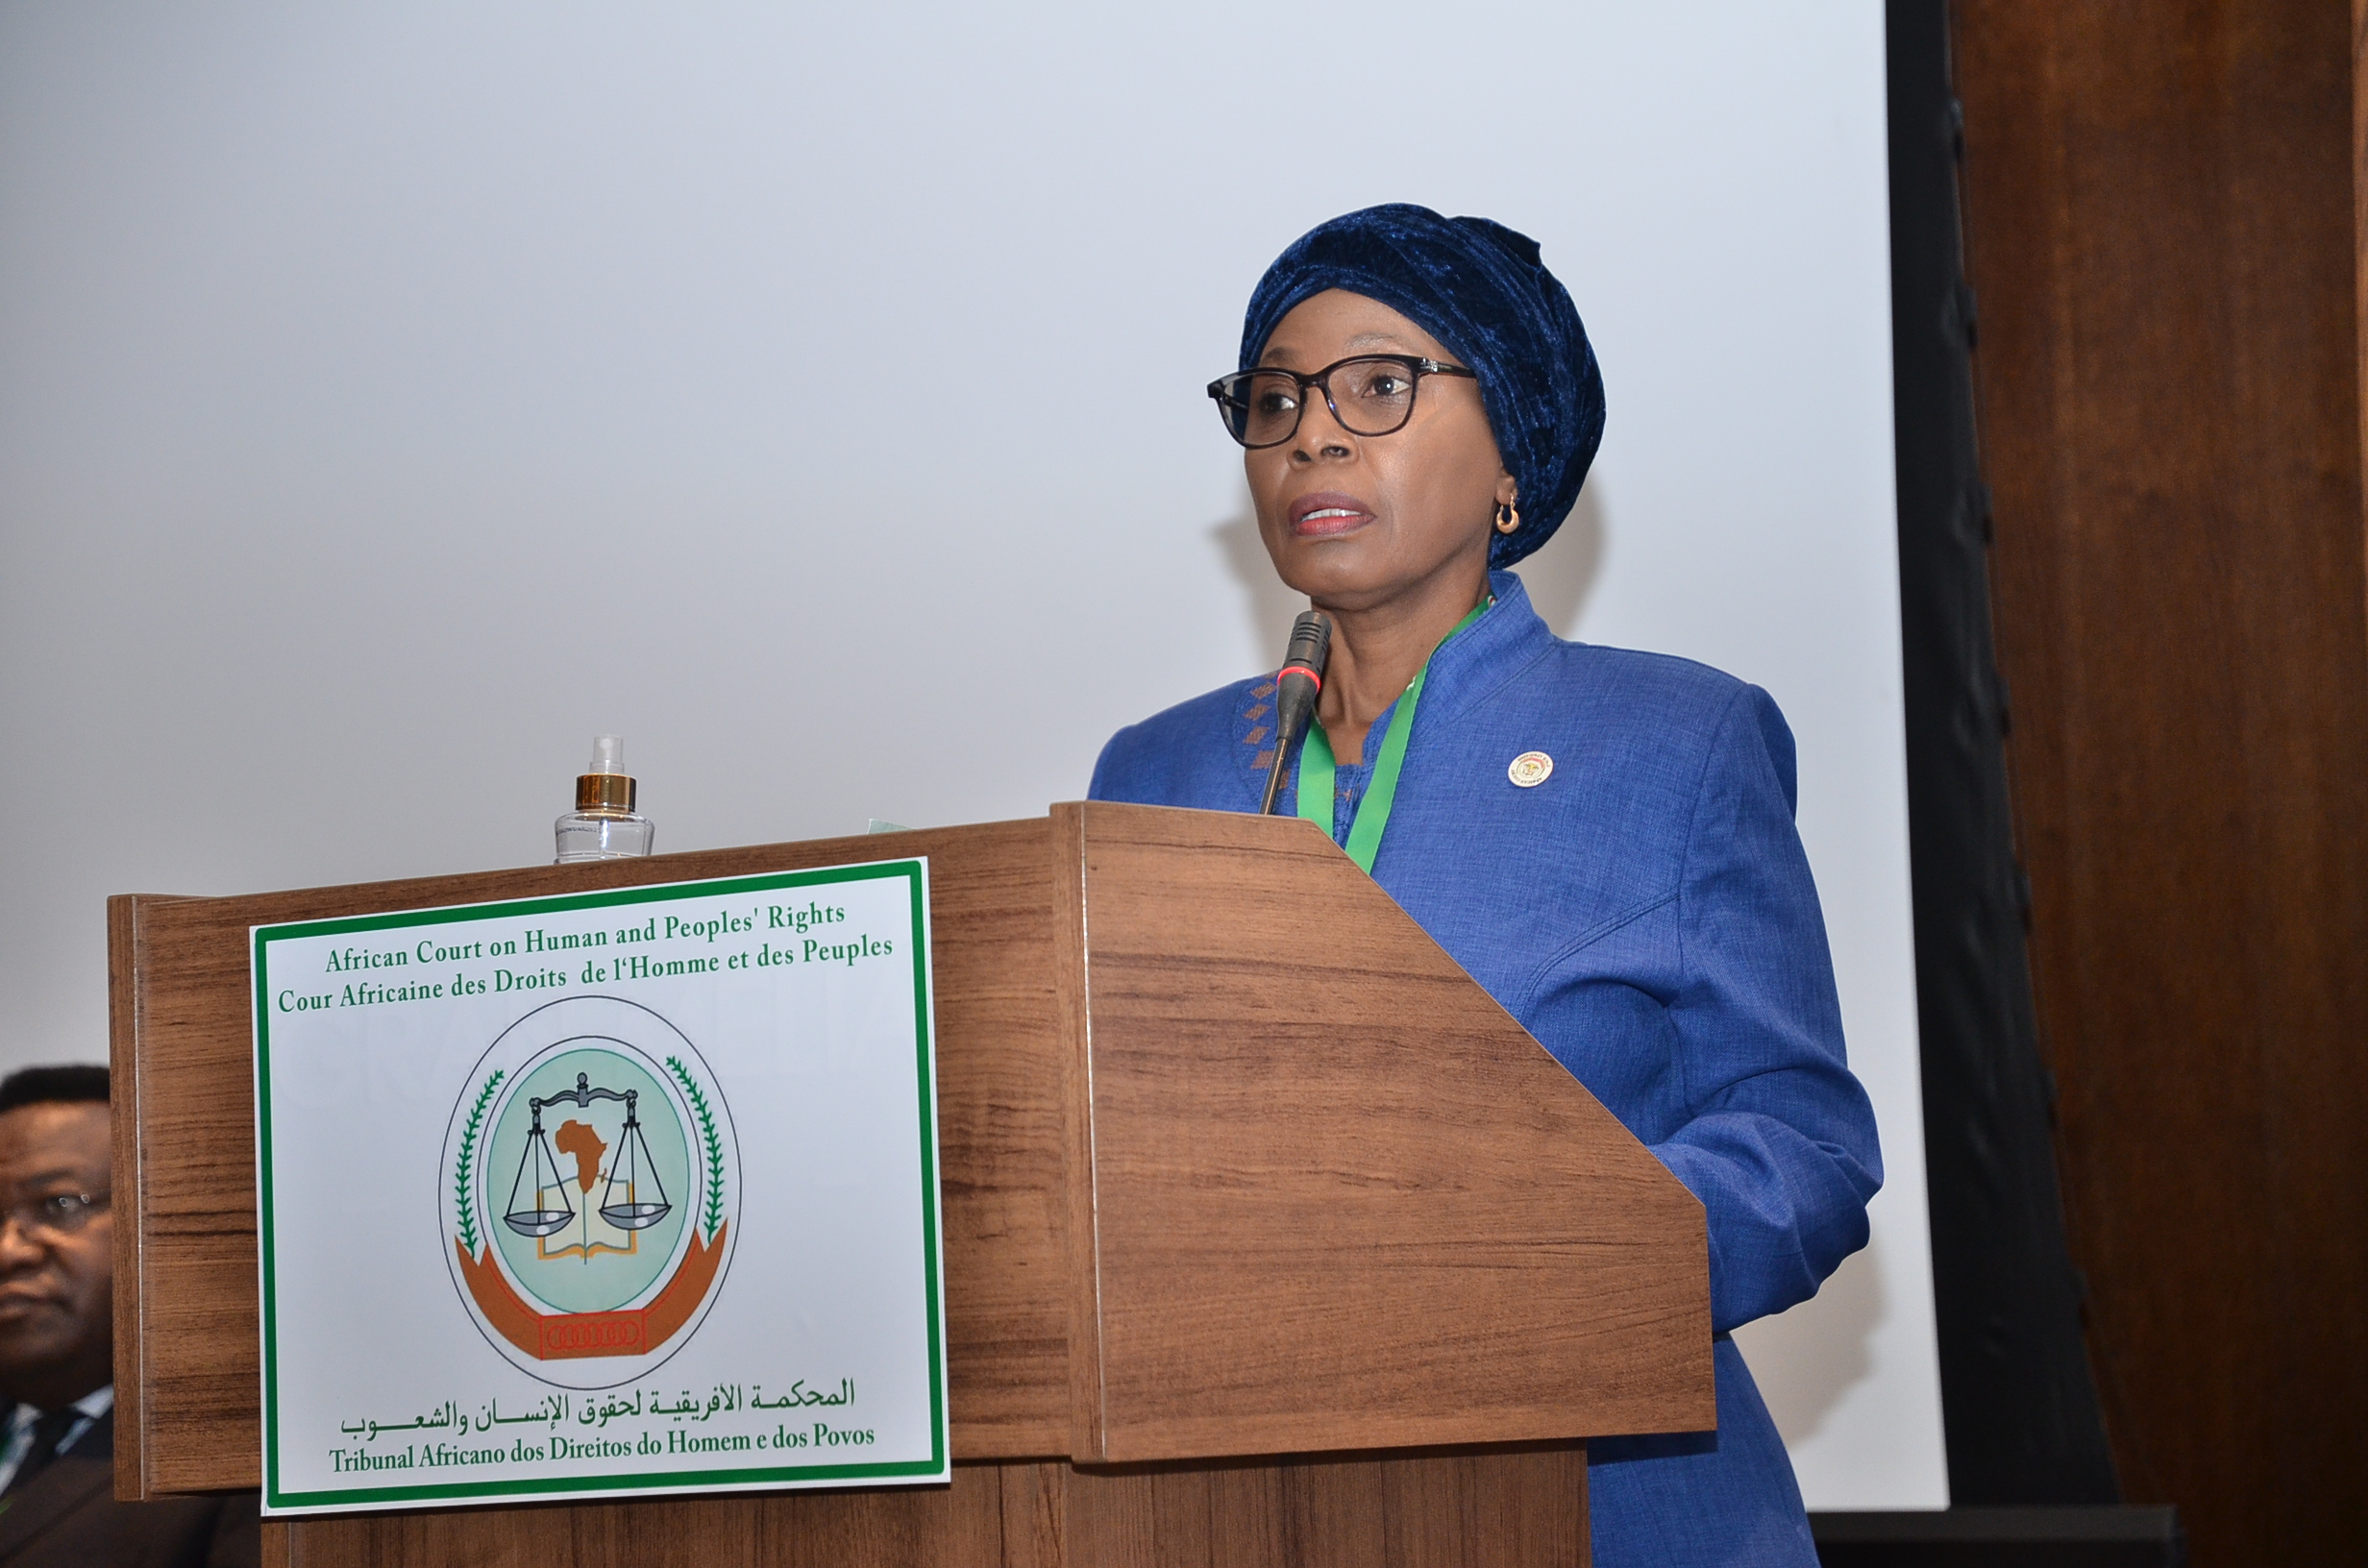 OPENING REMARKS OF HE IMANI D ABOUD, PRESIDENT OF THE AFRICAN COURT AT THE RETREAT BETWEEN THE COURT AND THE PERMANENT REPRESENTATIVE COMMITTEE OF THE AFRICAN UNION￼